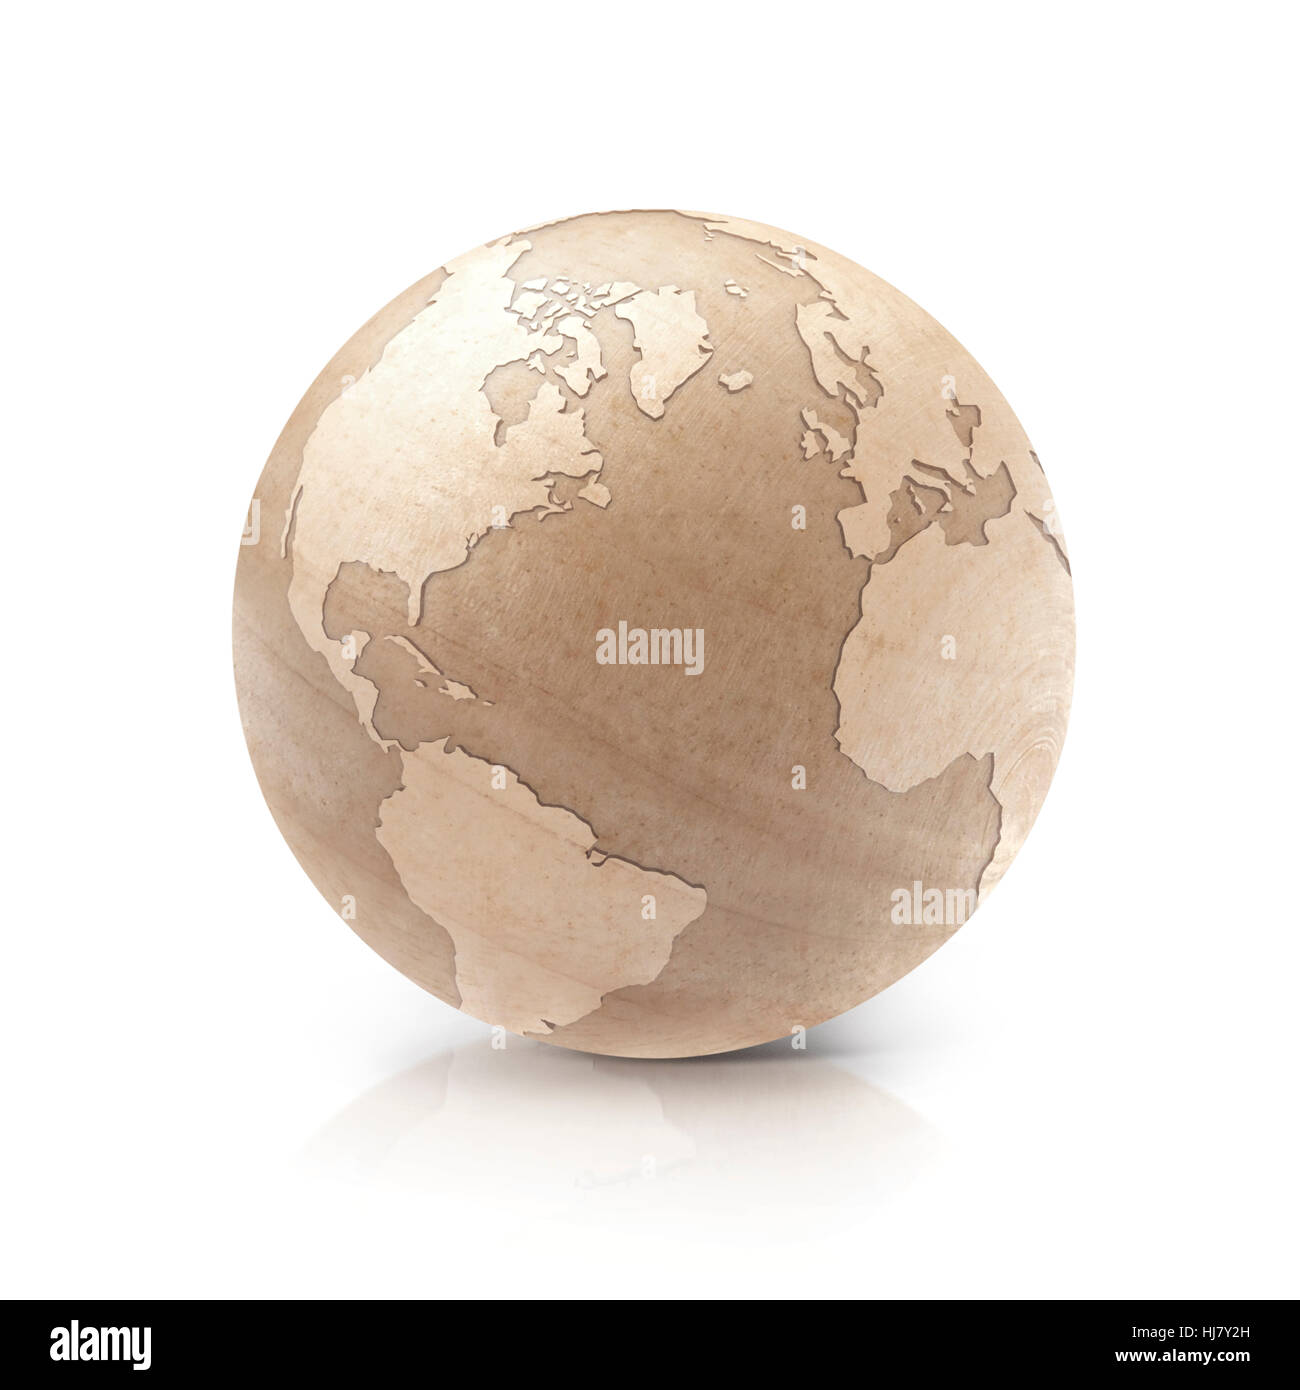 Wood globe 3D illustration North and South America map on white background Stock Photo